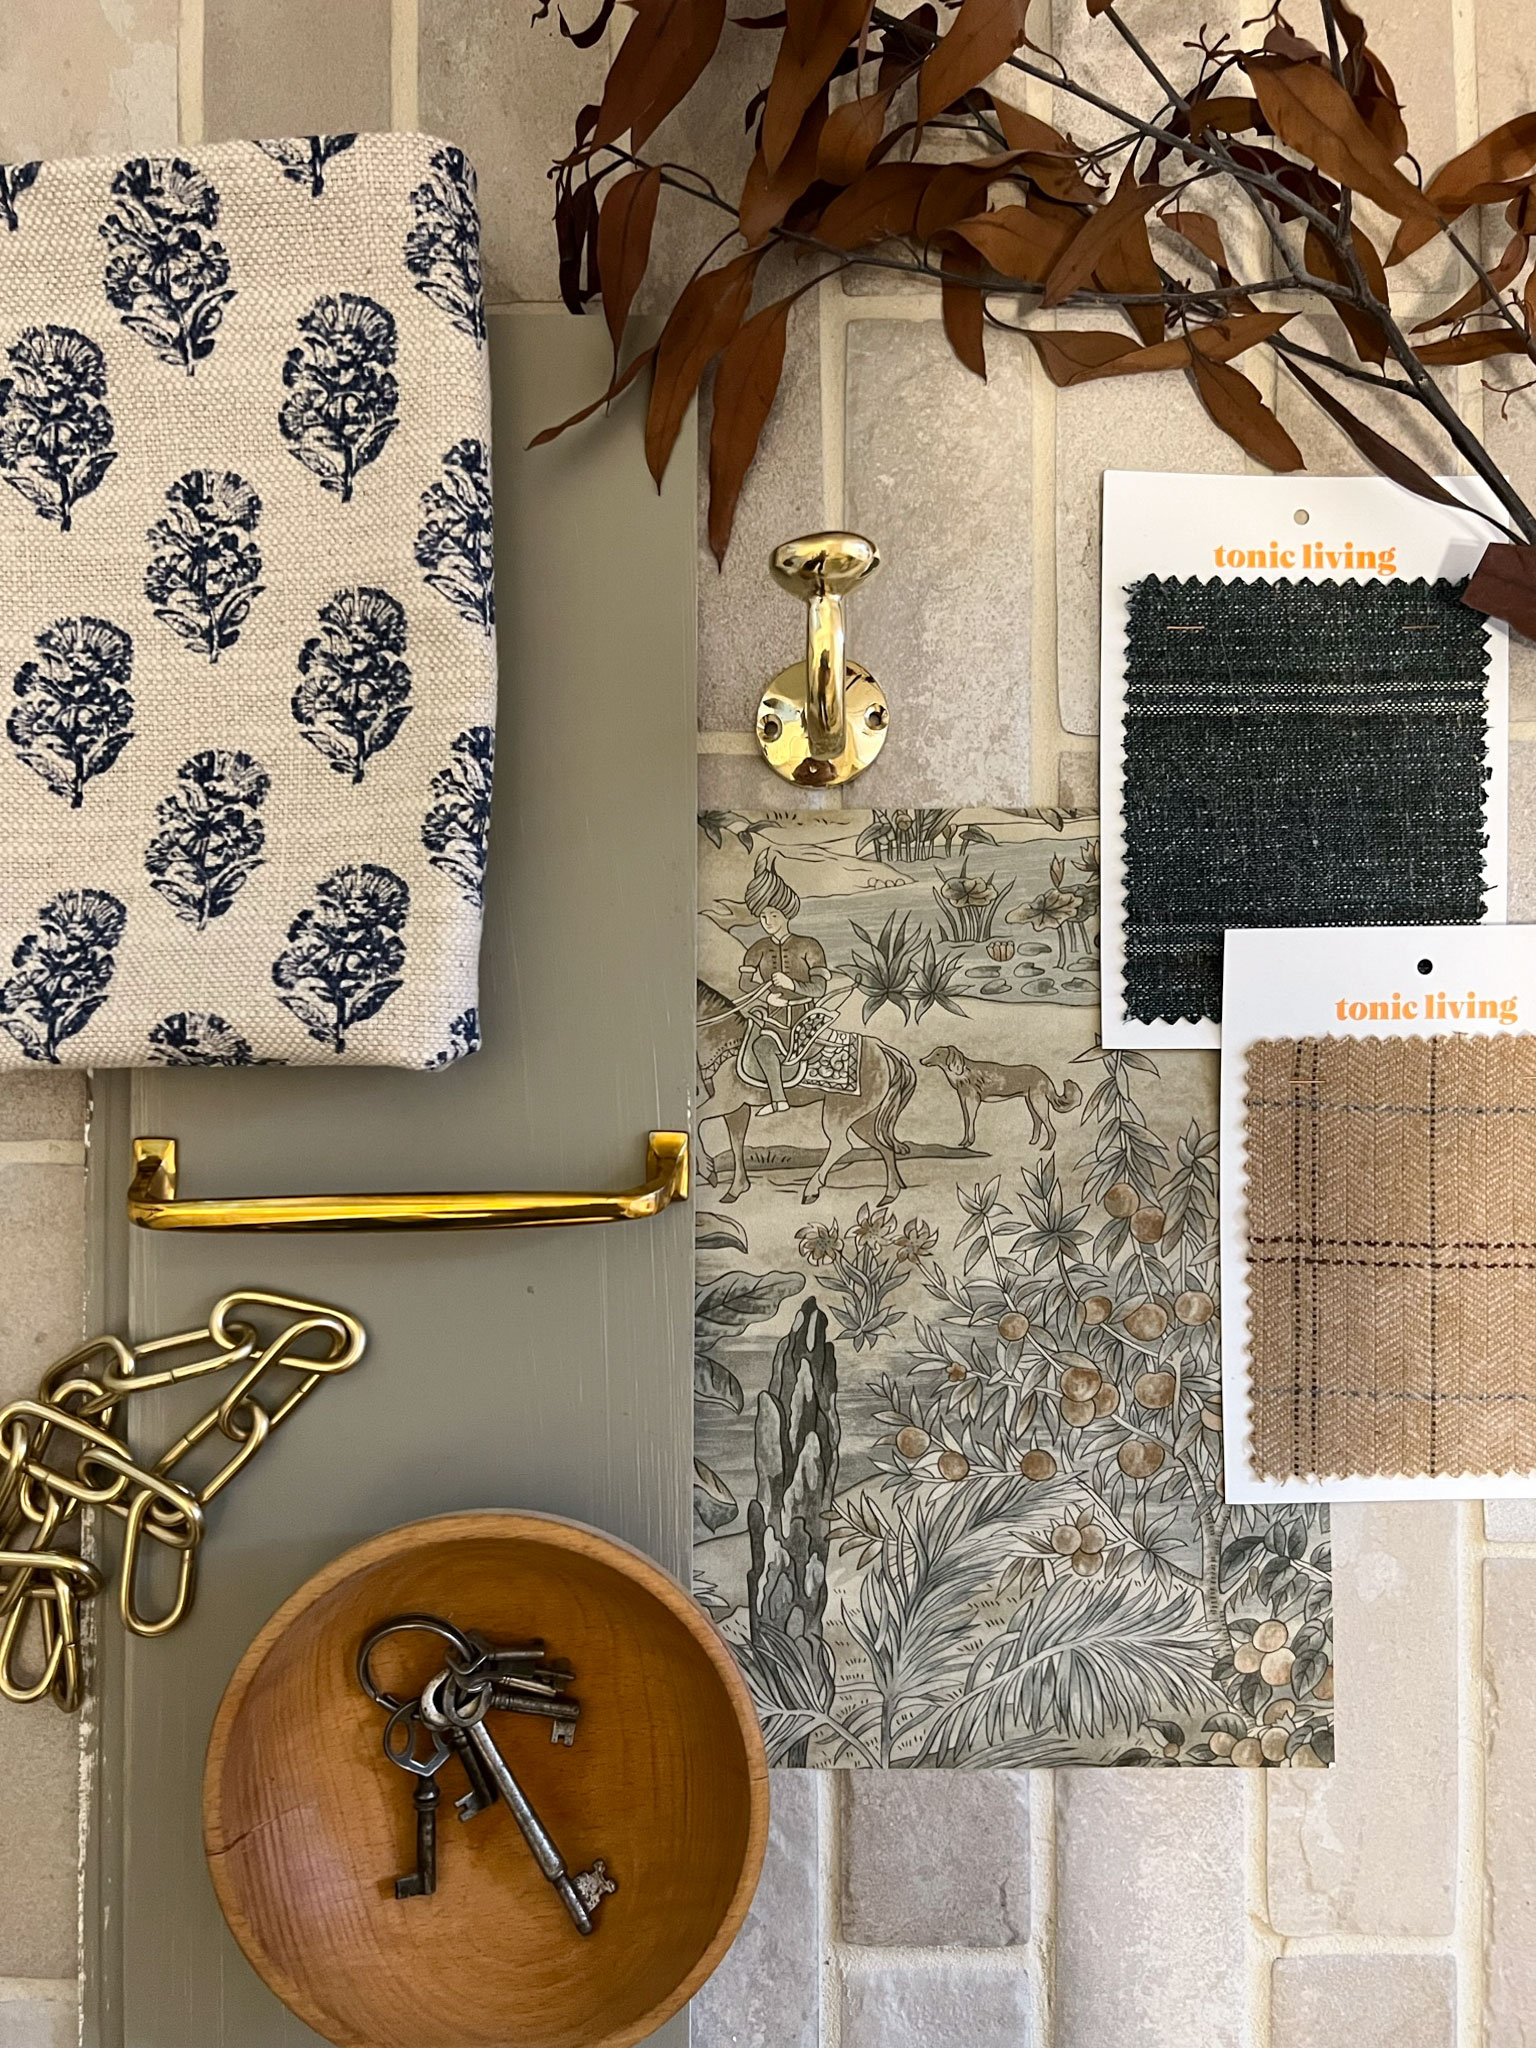 wallpaper sample, fabric samples, brass hardware and a wood bowl and brown dried leaves laying on a tile floor flatlay